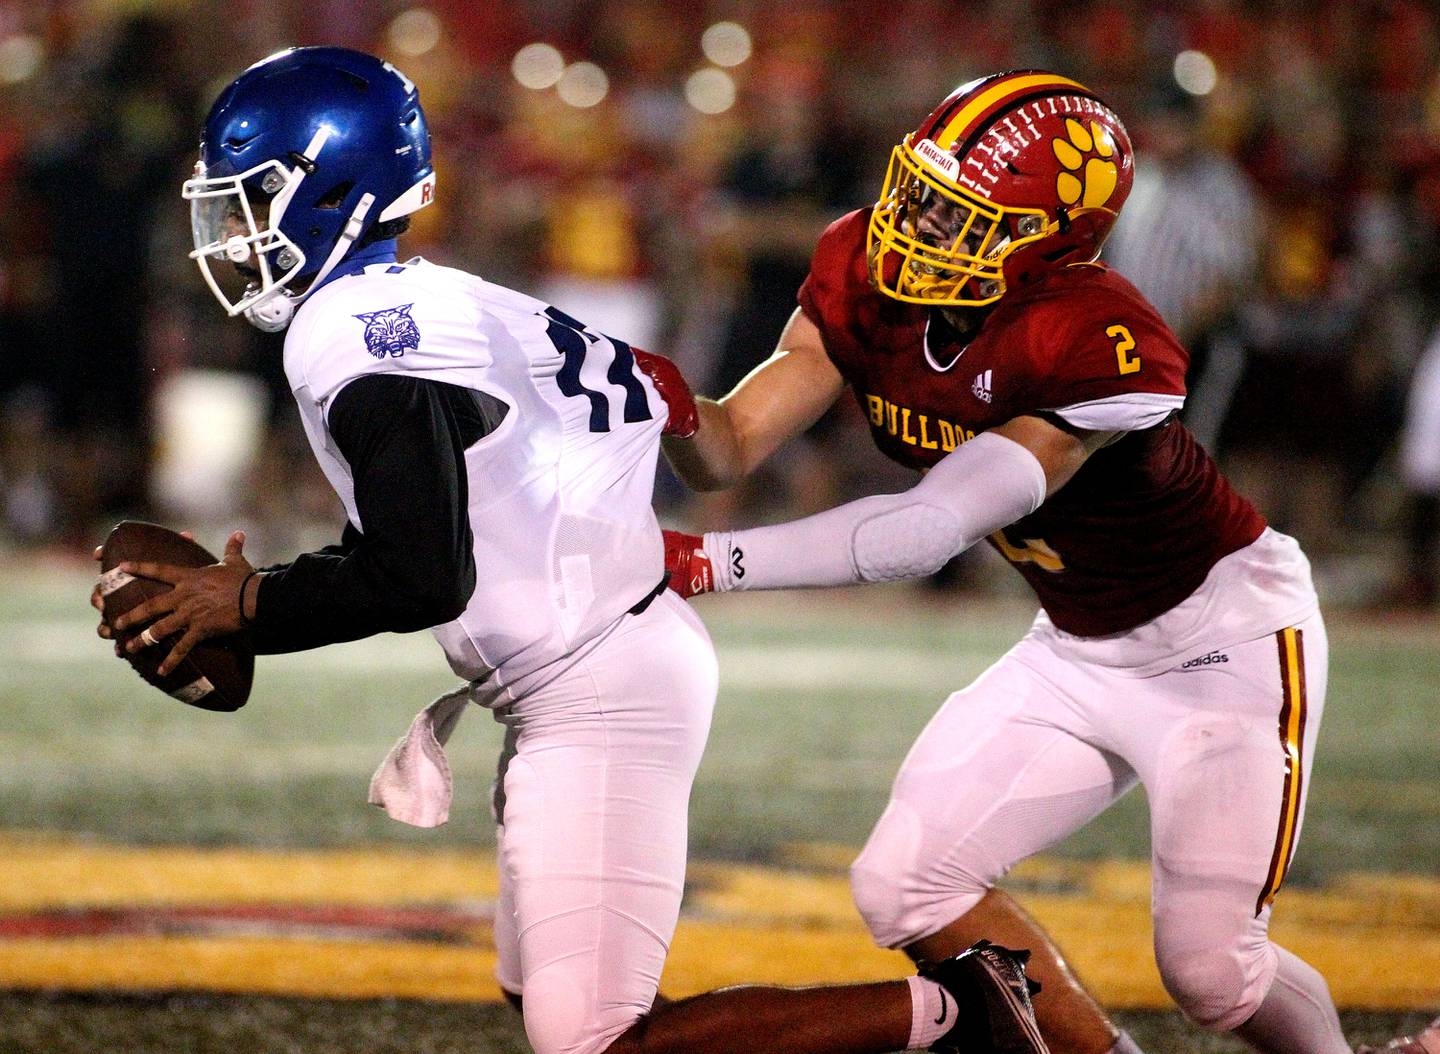 Batavia's Drew Bartels (2) tries to take down Phillips quarterback Tyler Turner during the first game of the season in Batavia on Friday, Aug. 27, 2021.